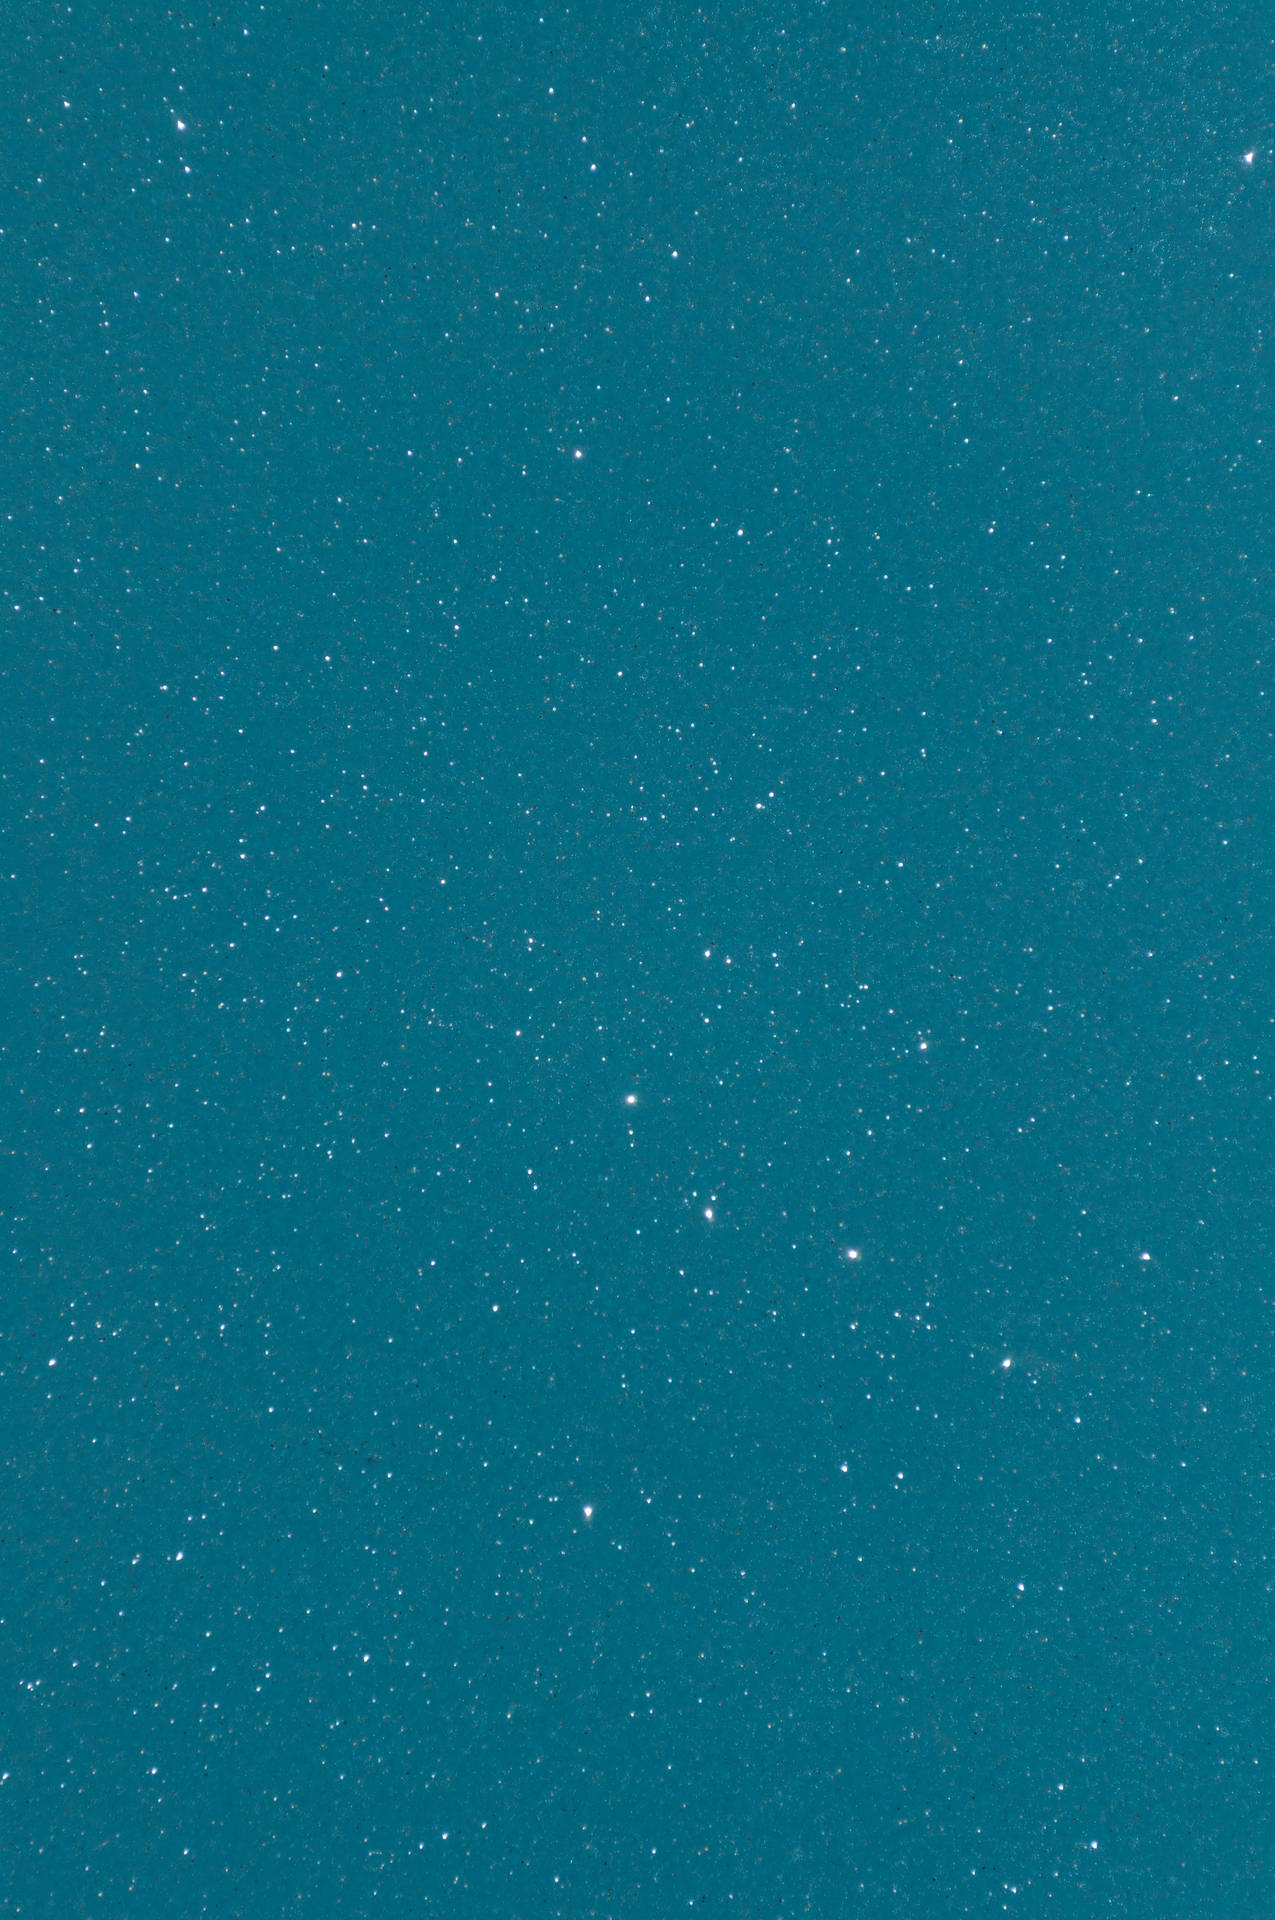 Teal Starry Night Picture